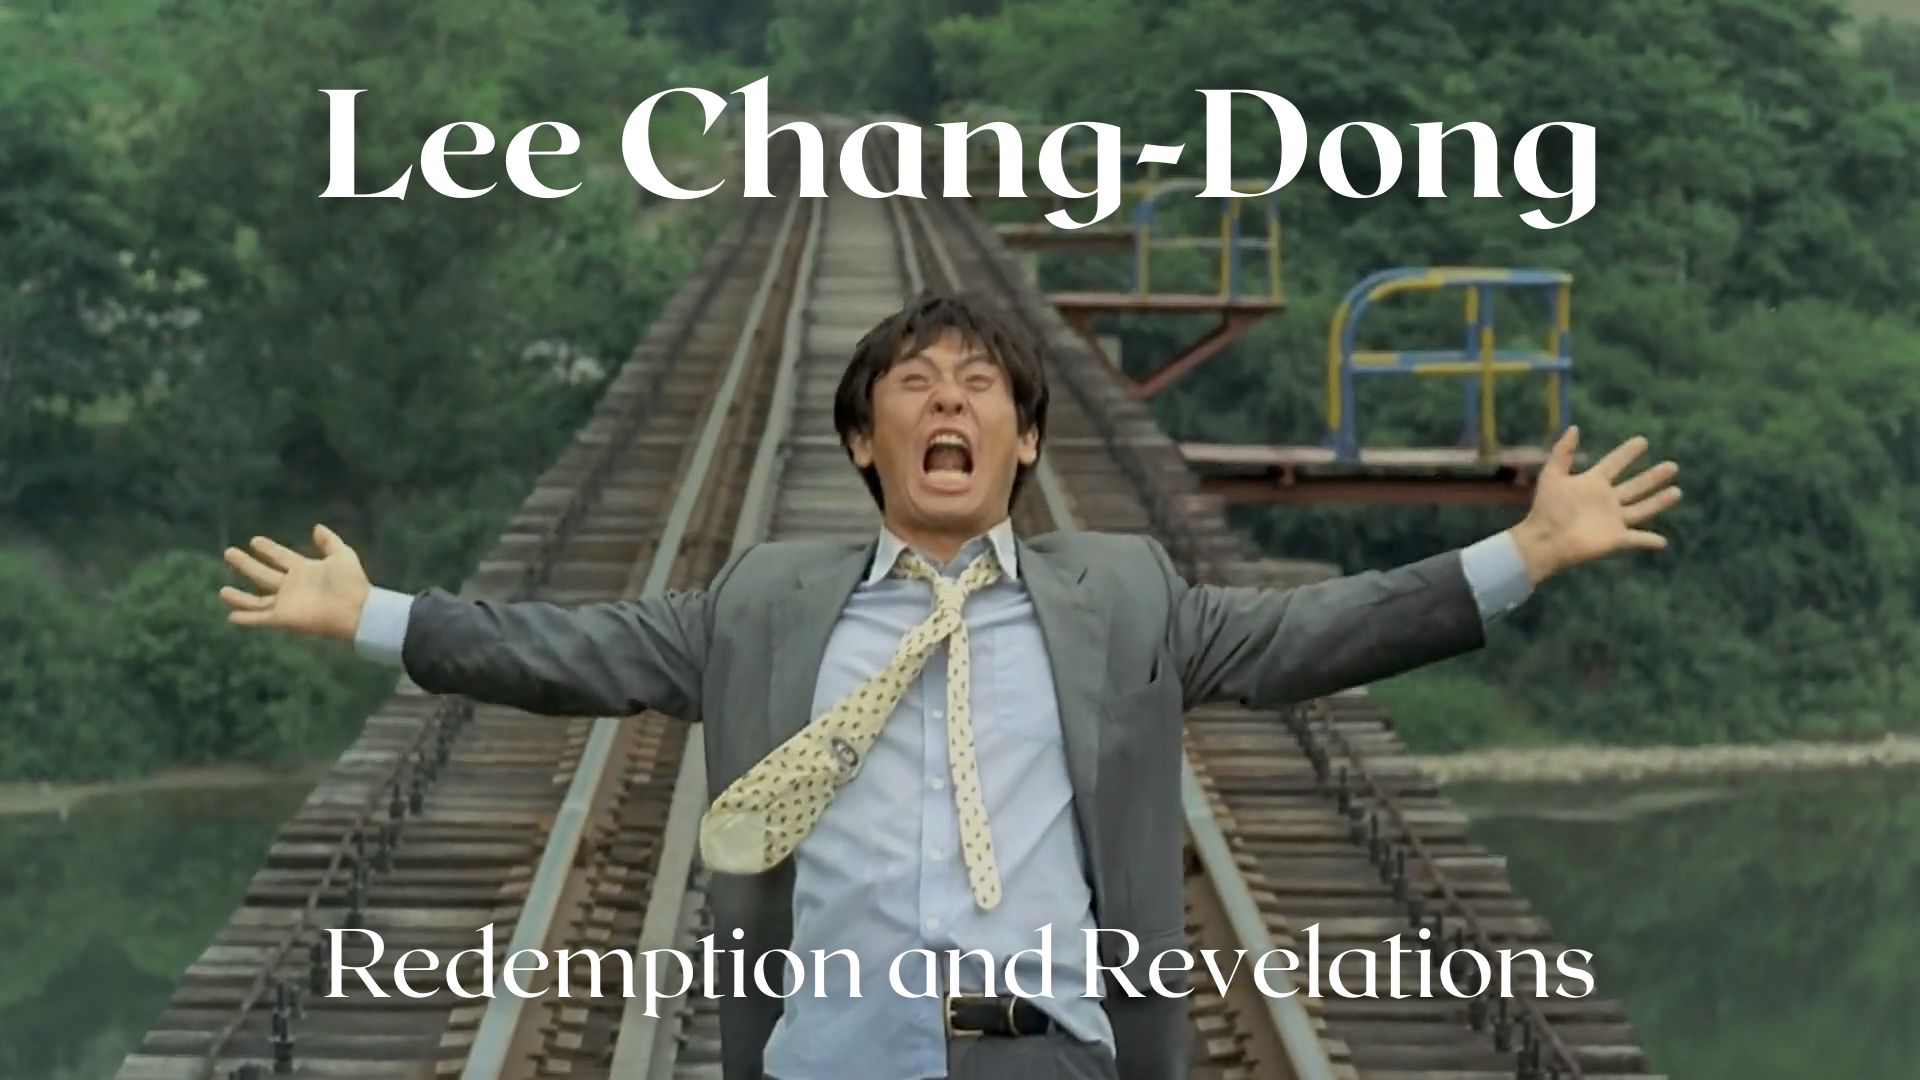 Lee Chang-dong: Redemption and Revelations